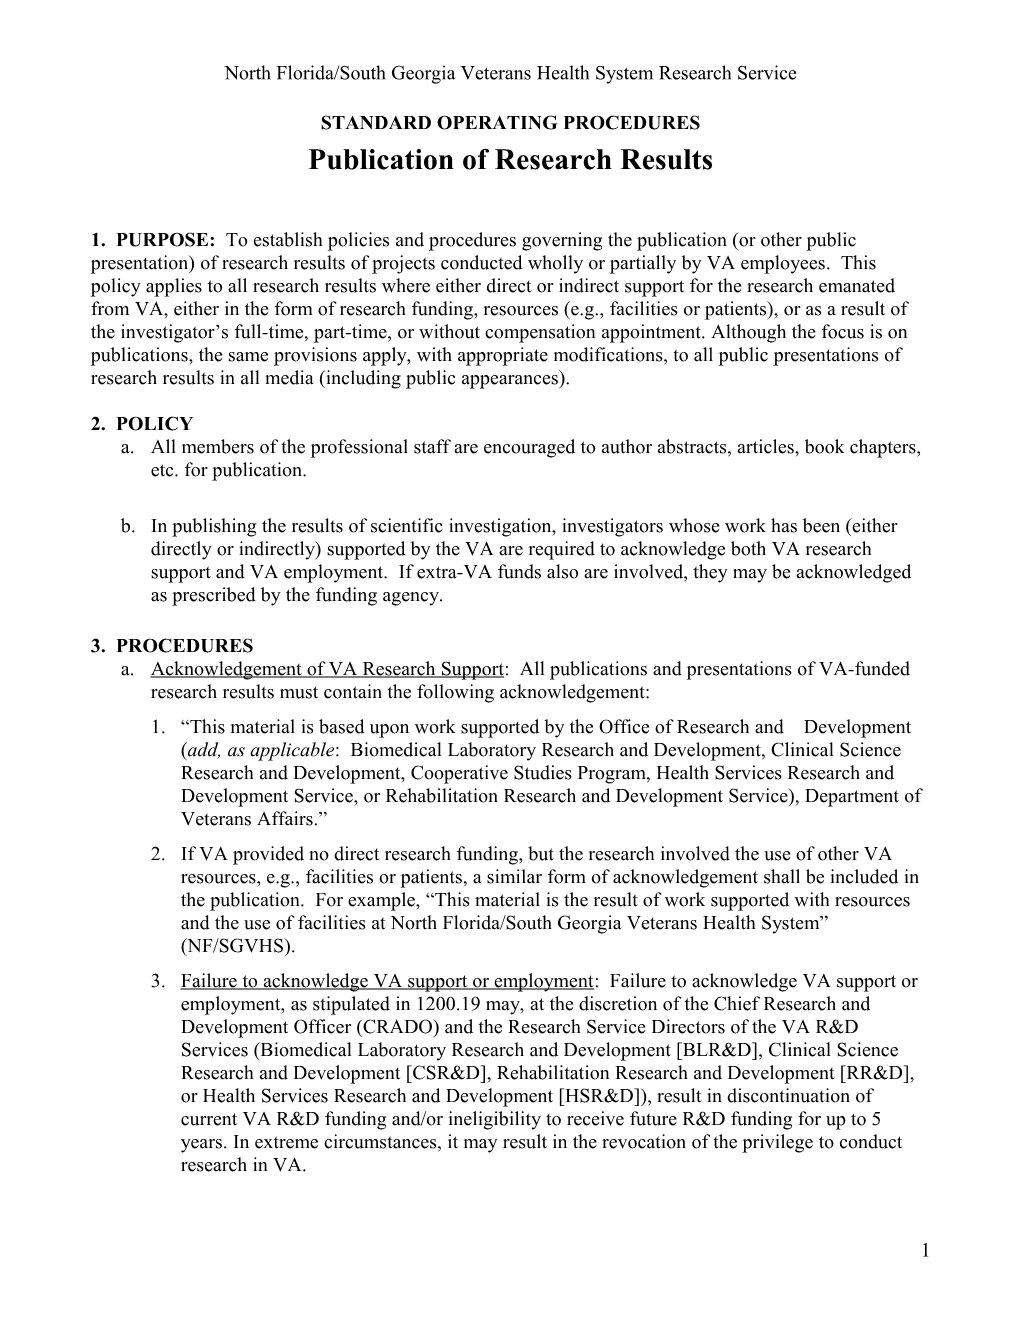 Publication of Research Results